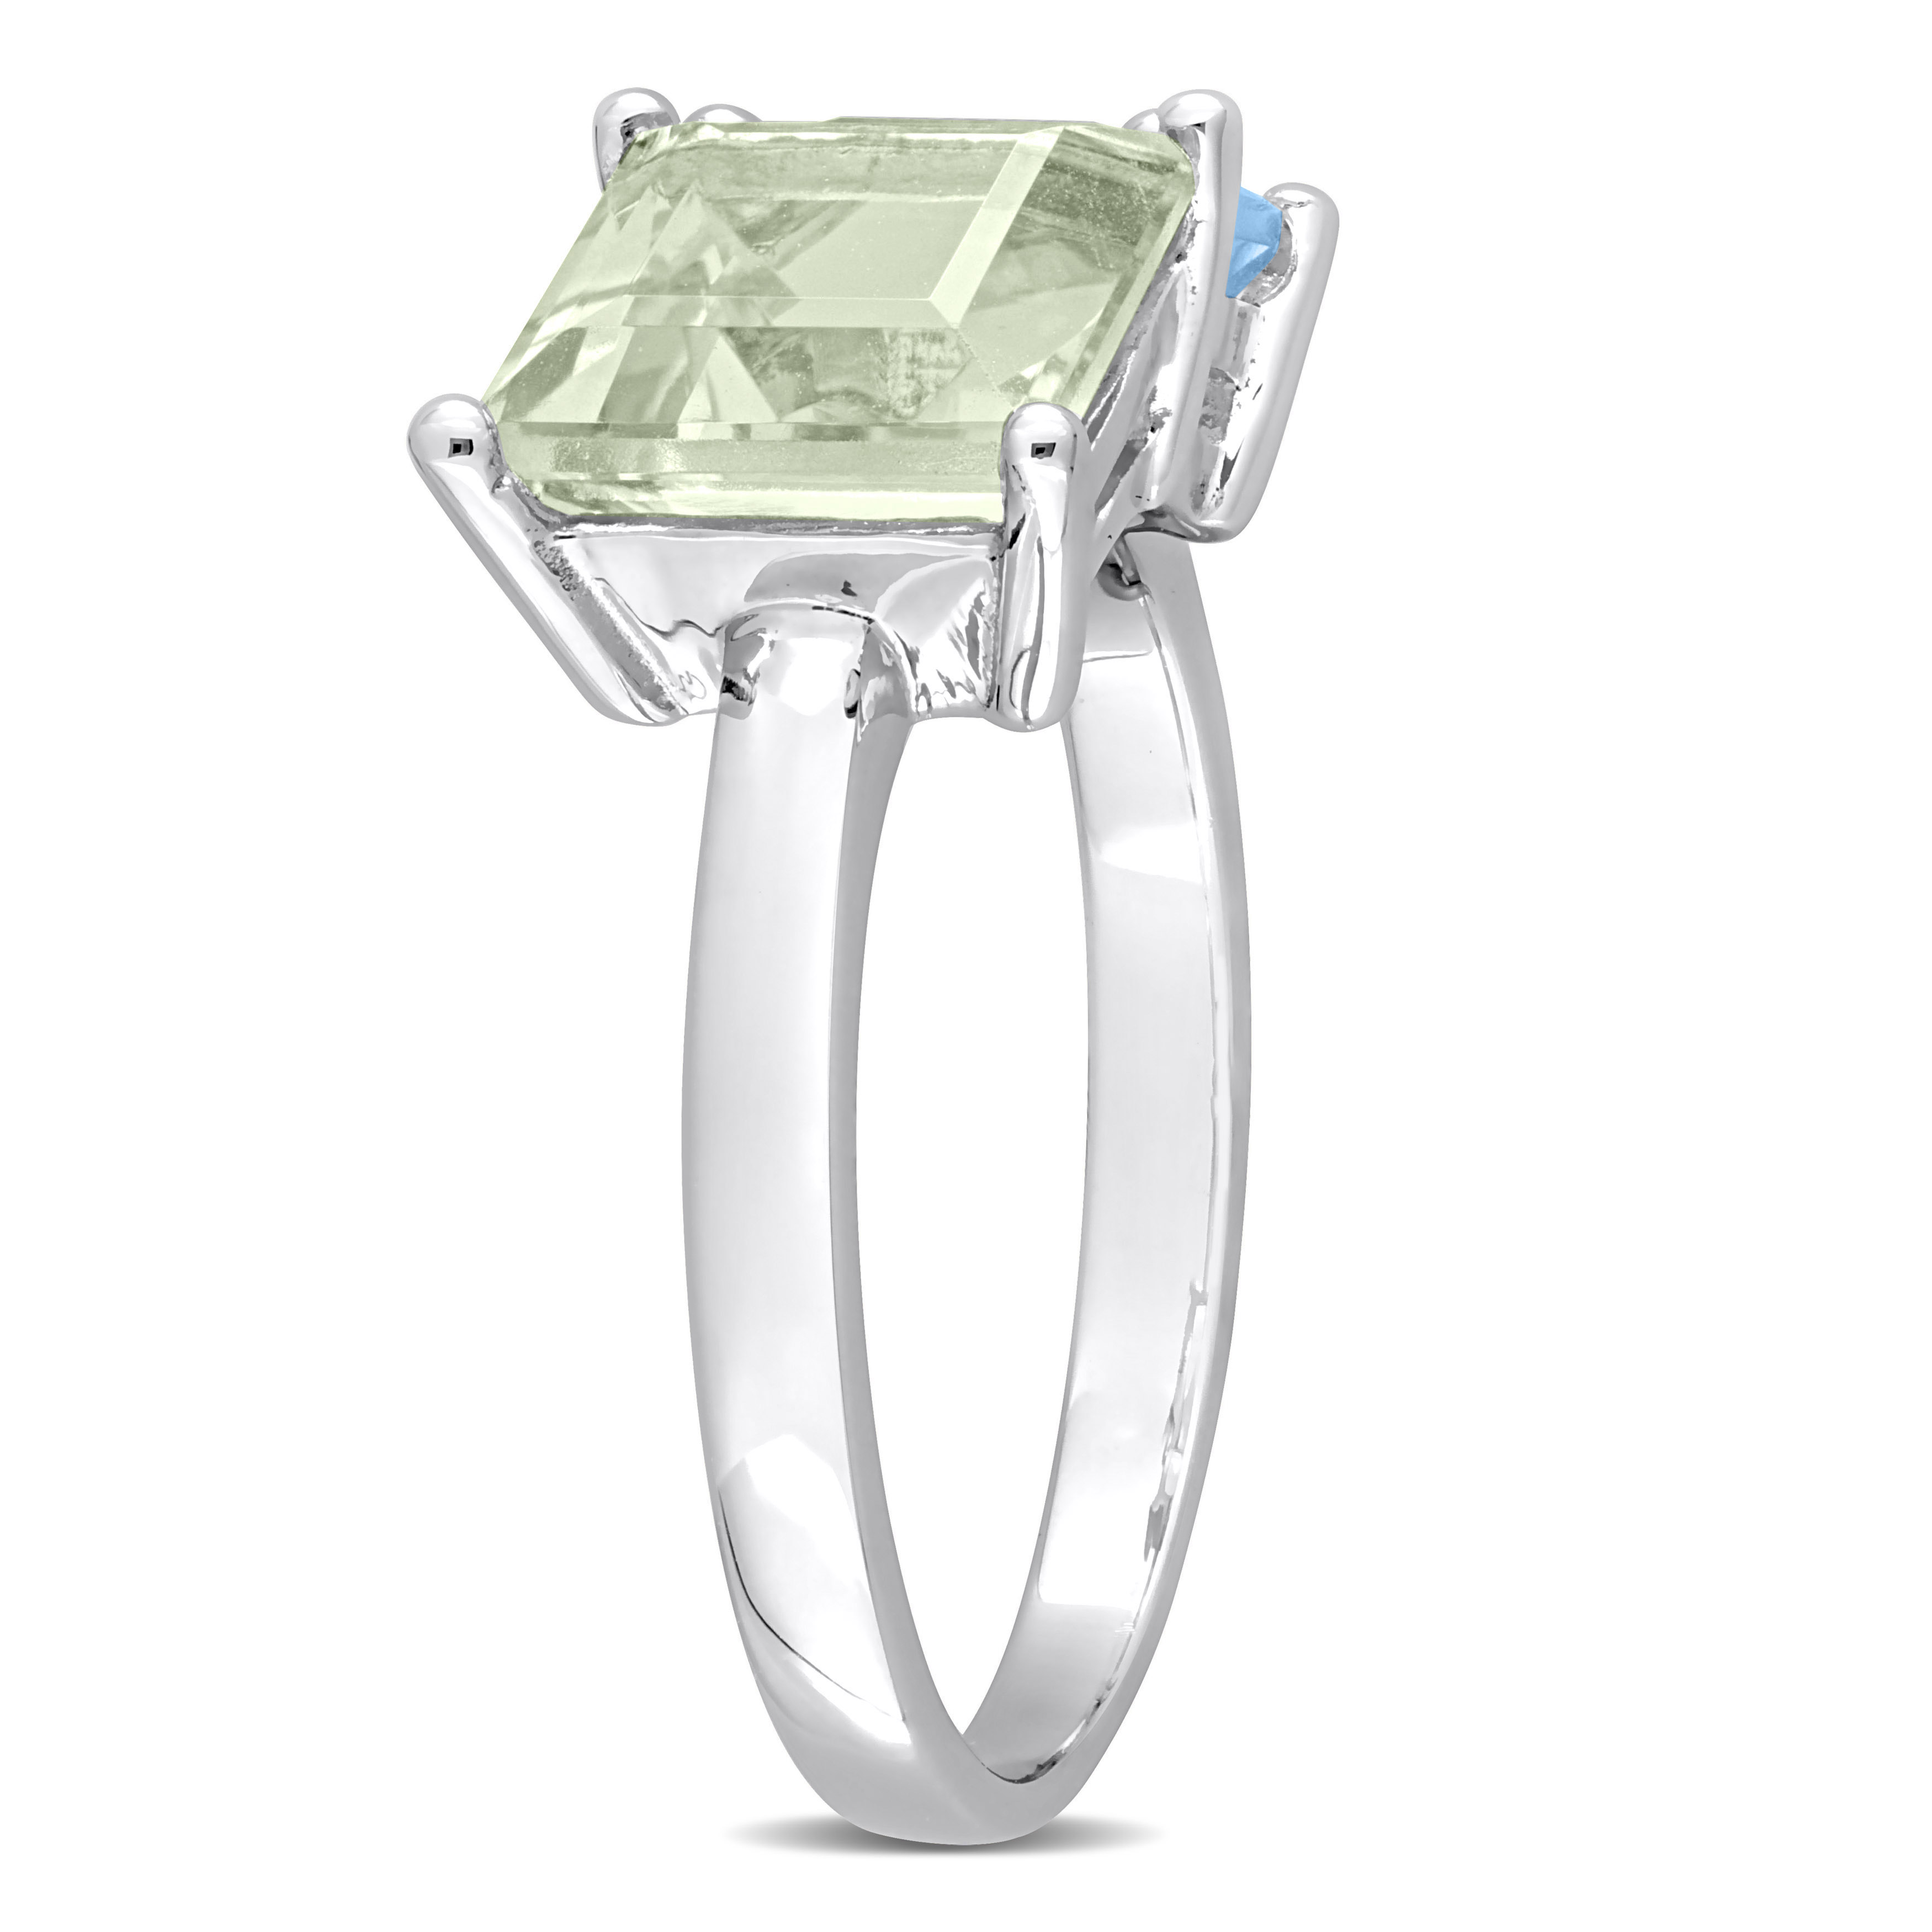 3 3/4 CT TGW Square Green Quartz and Sky Blue Topaz Ring in Sterling Silver